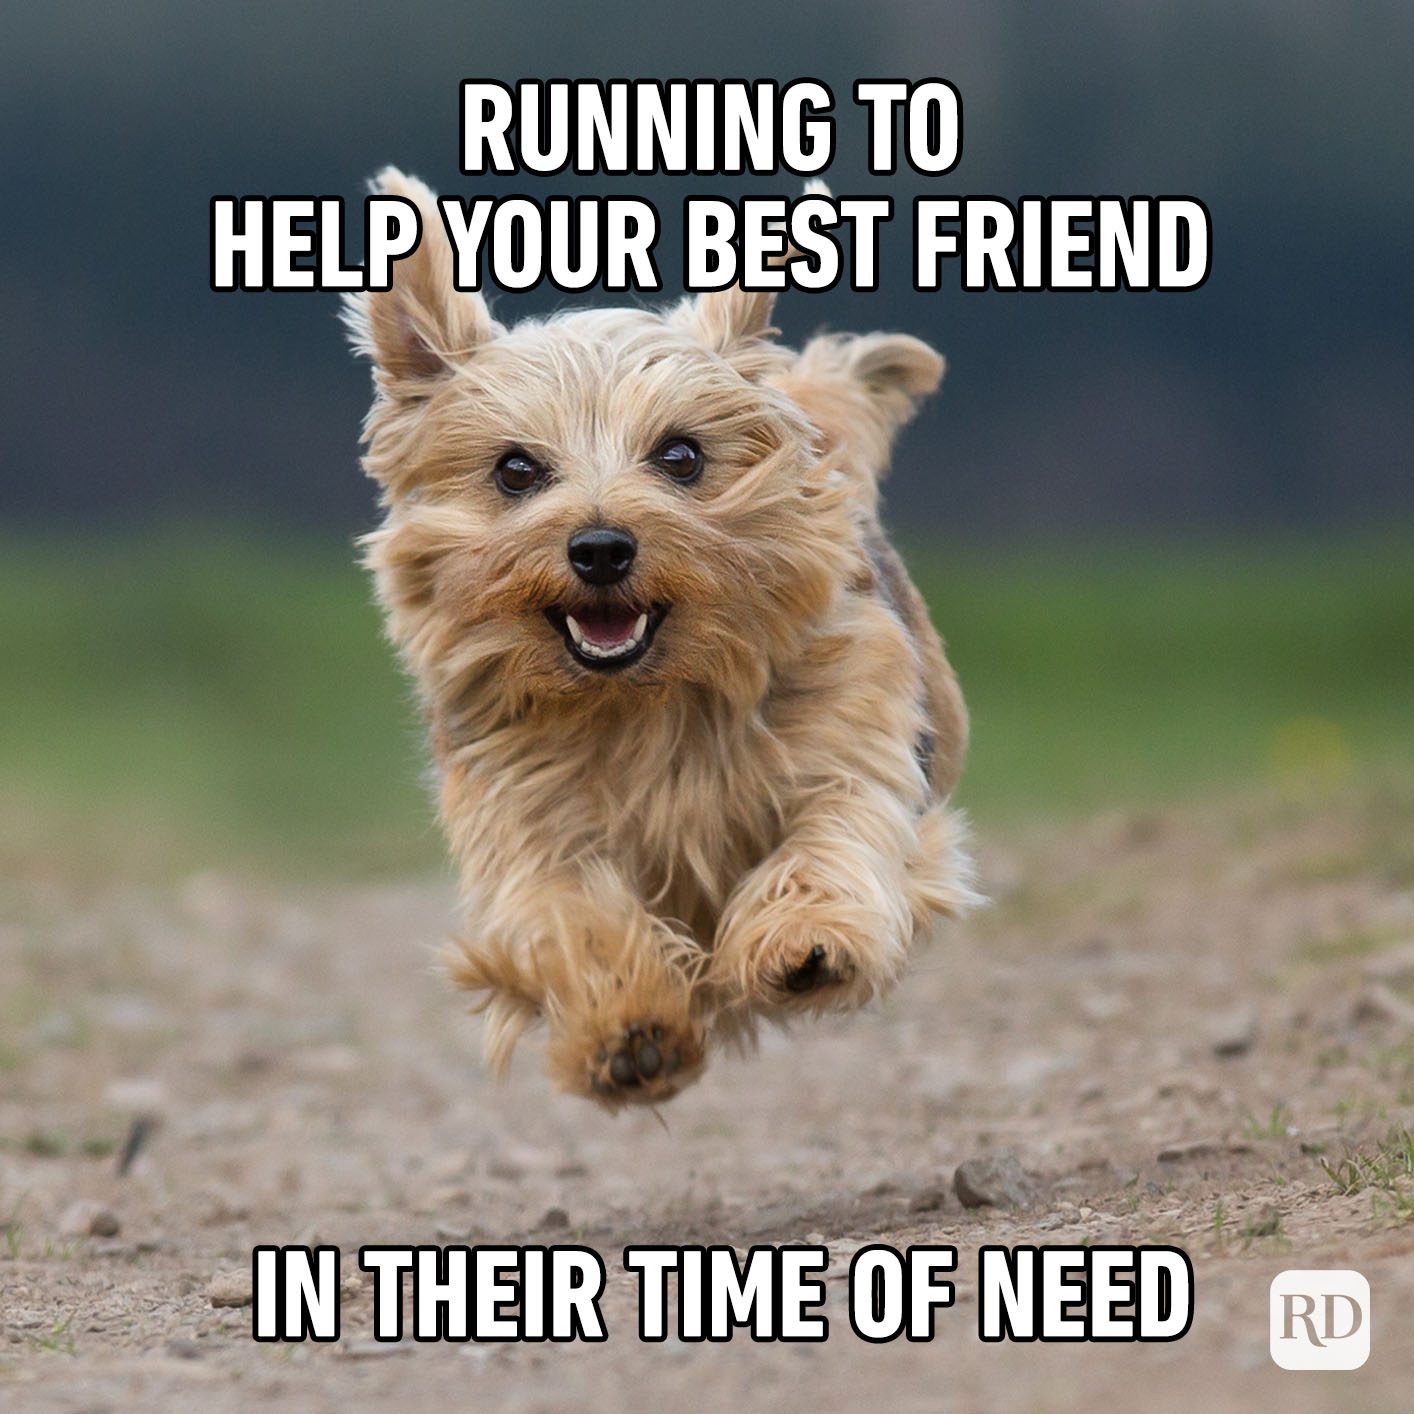 Meme text: Running to help your best friend in their time of need